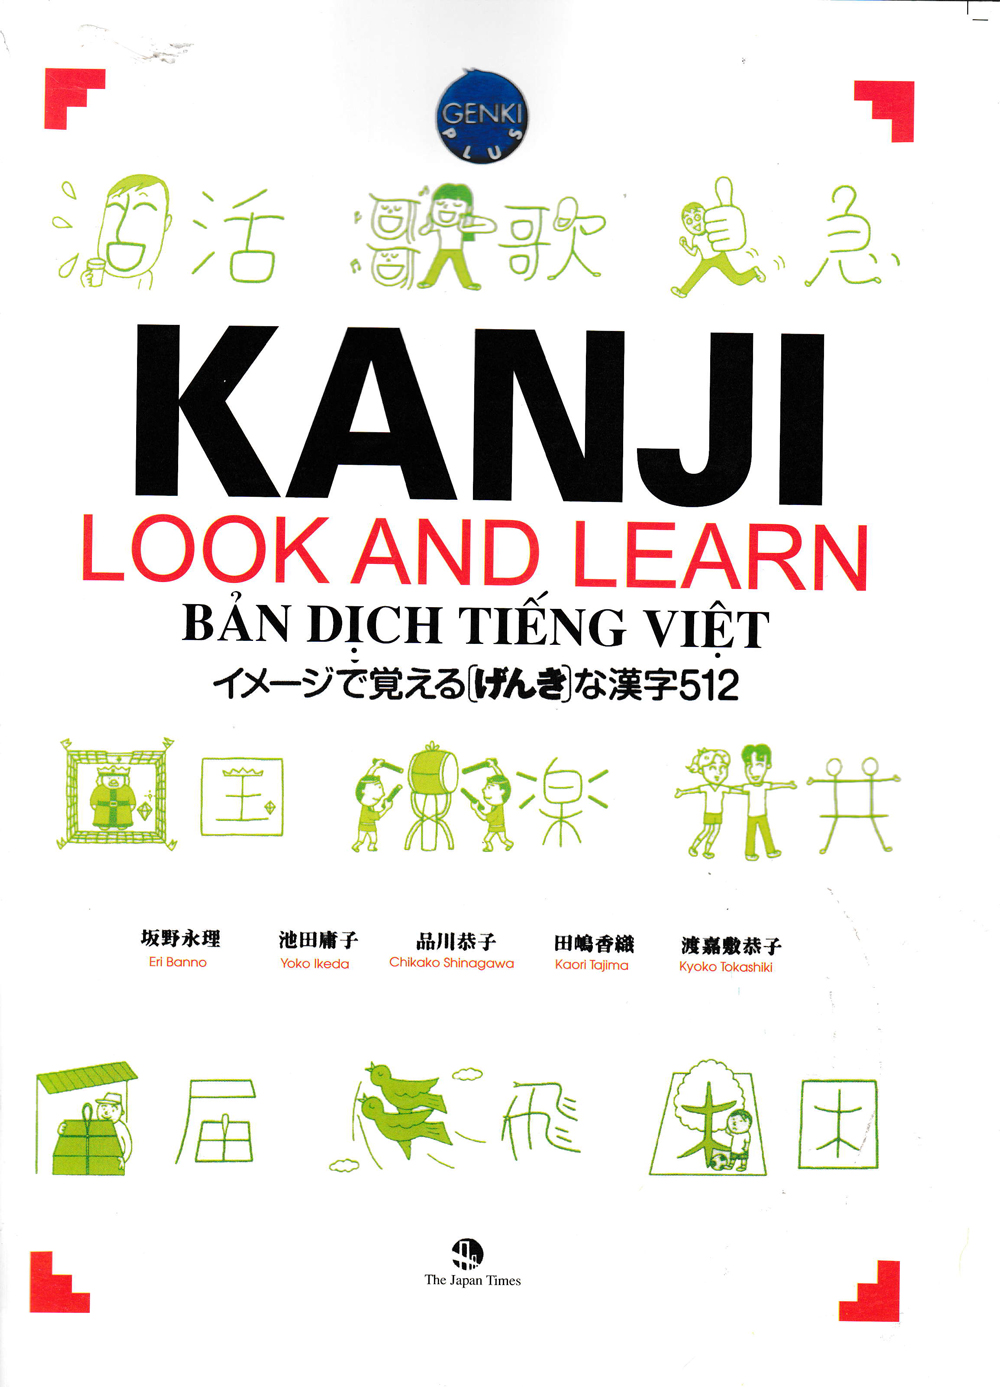 Kanji Look And Learn - Bản Dịch Tiếng Việt